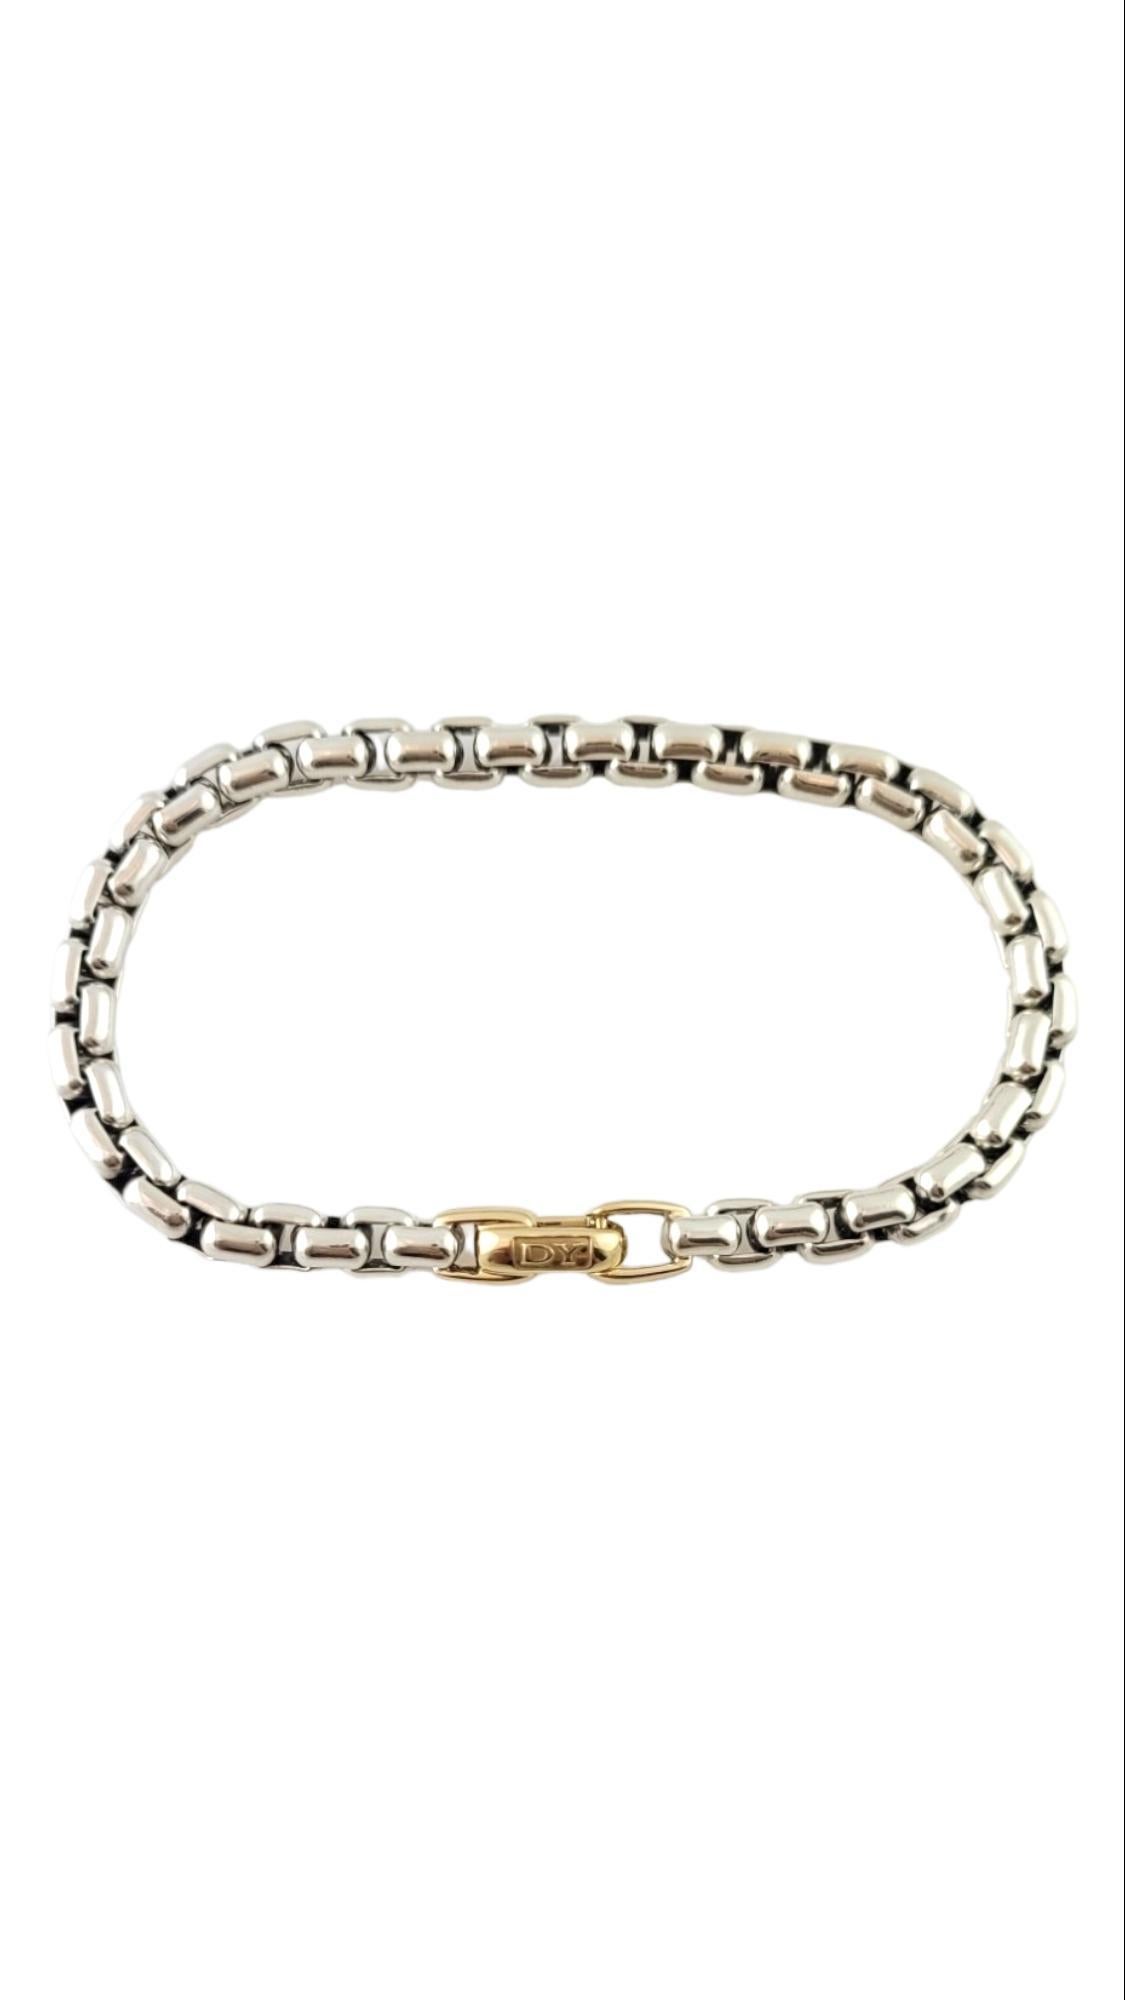 David Yurman 14K & Sterling Silver Box Chain Bracelet with Box #15199 In Good Condition For Sale In Washington Depot, CT